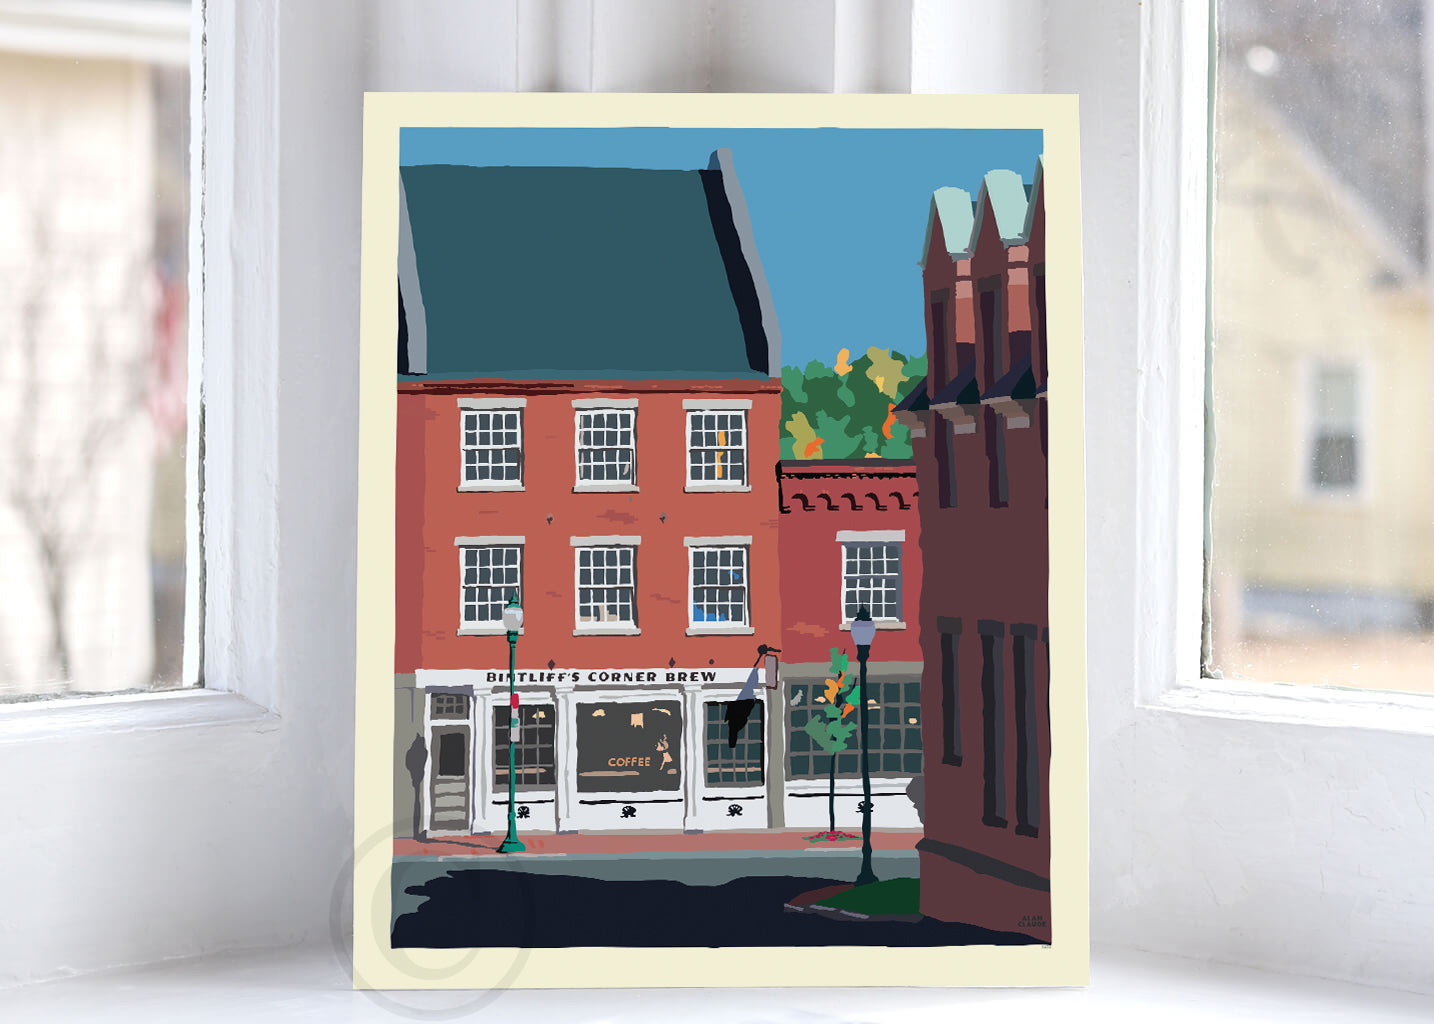 Cafe in Gardiner Art Print 8" x 10" Wall Poster By Alan Claude - Maine